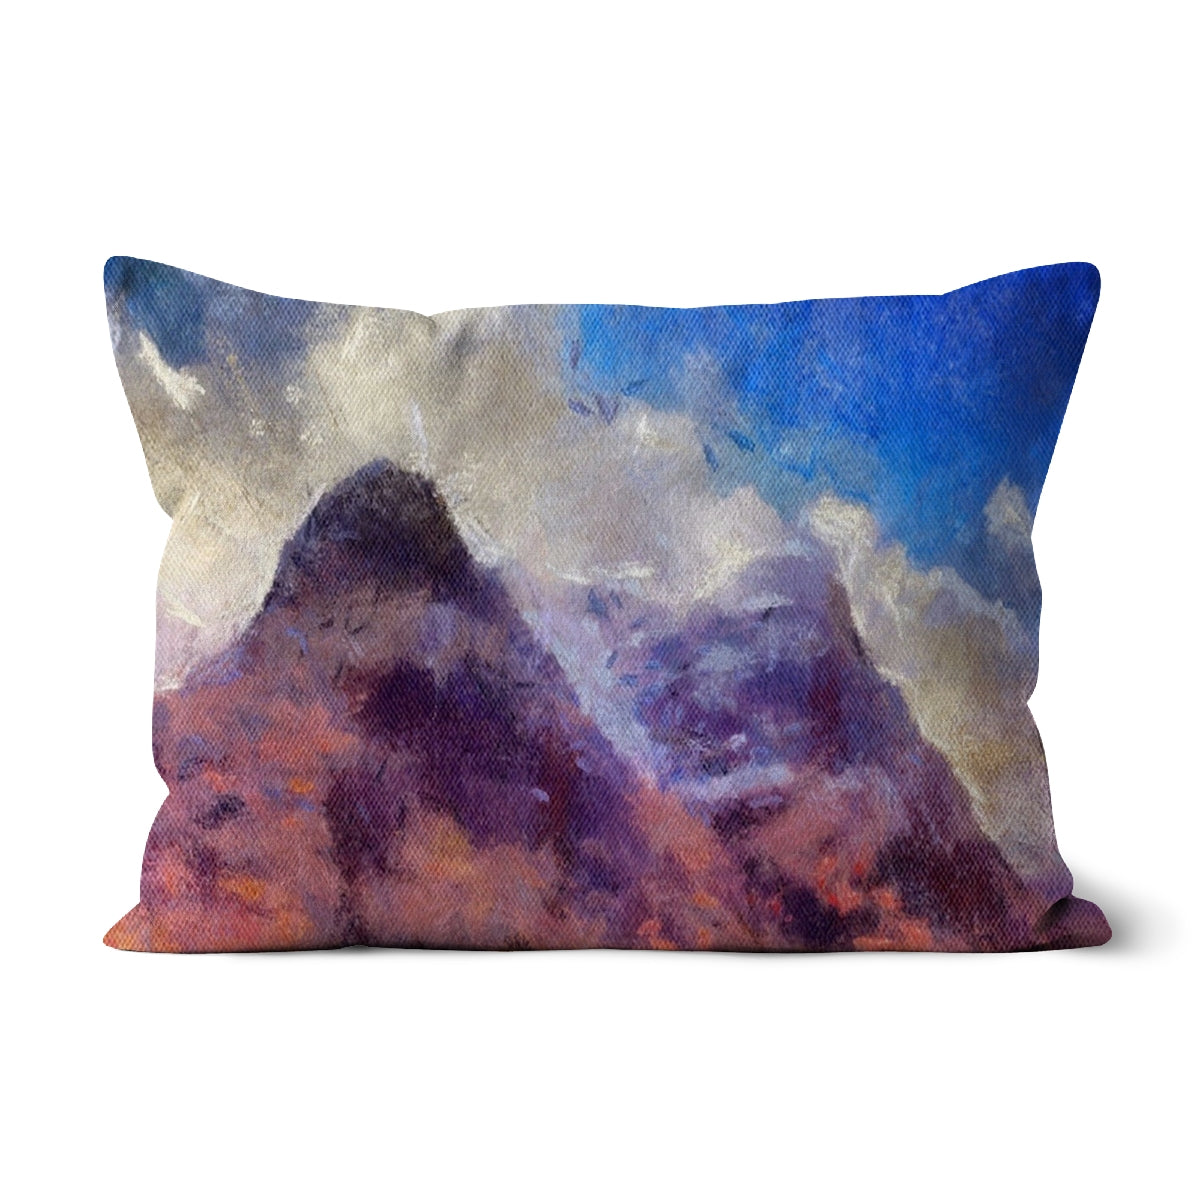 Glencoe Art Gifts Cushion-Cushions-Glencoe Art Gallery-Faux Suede-19"x13"-Paintings, Prints, Homeware, Art Gifts From Scotland By Scottish Artist Kevin Hunter